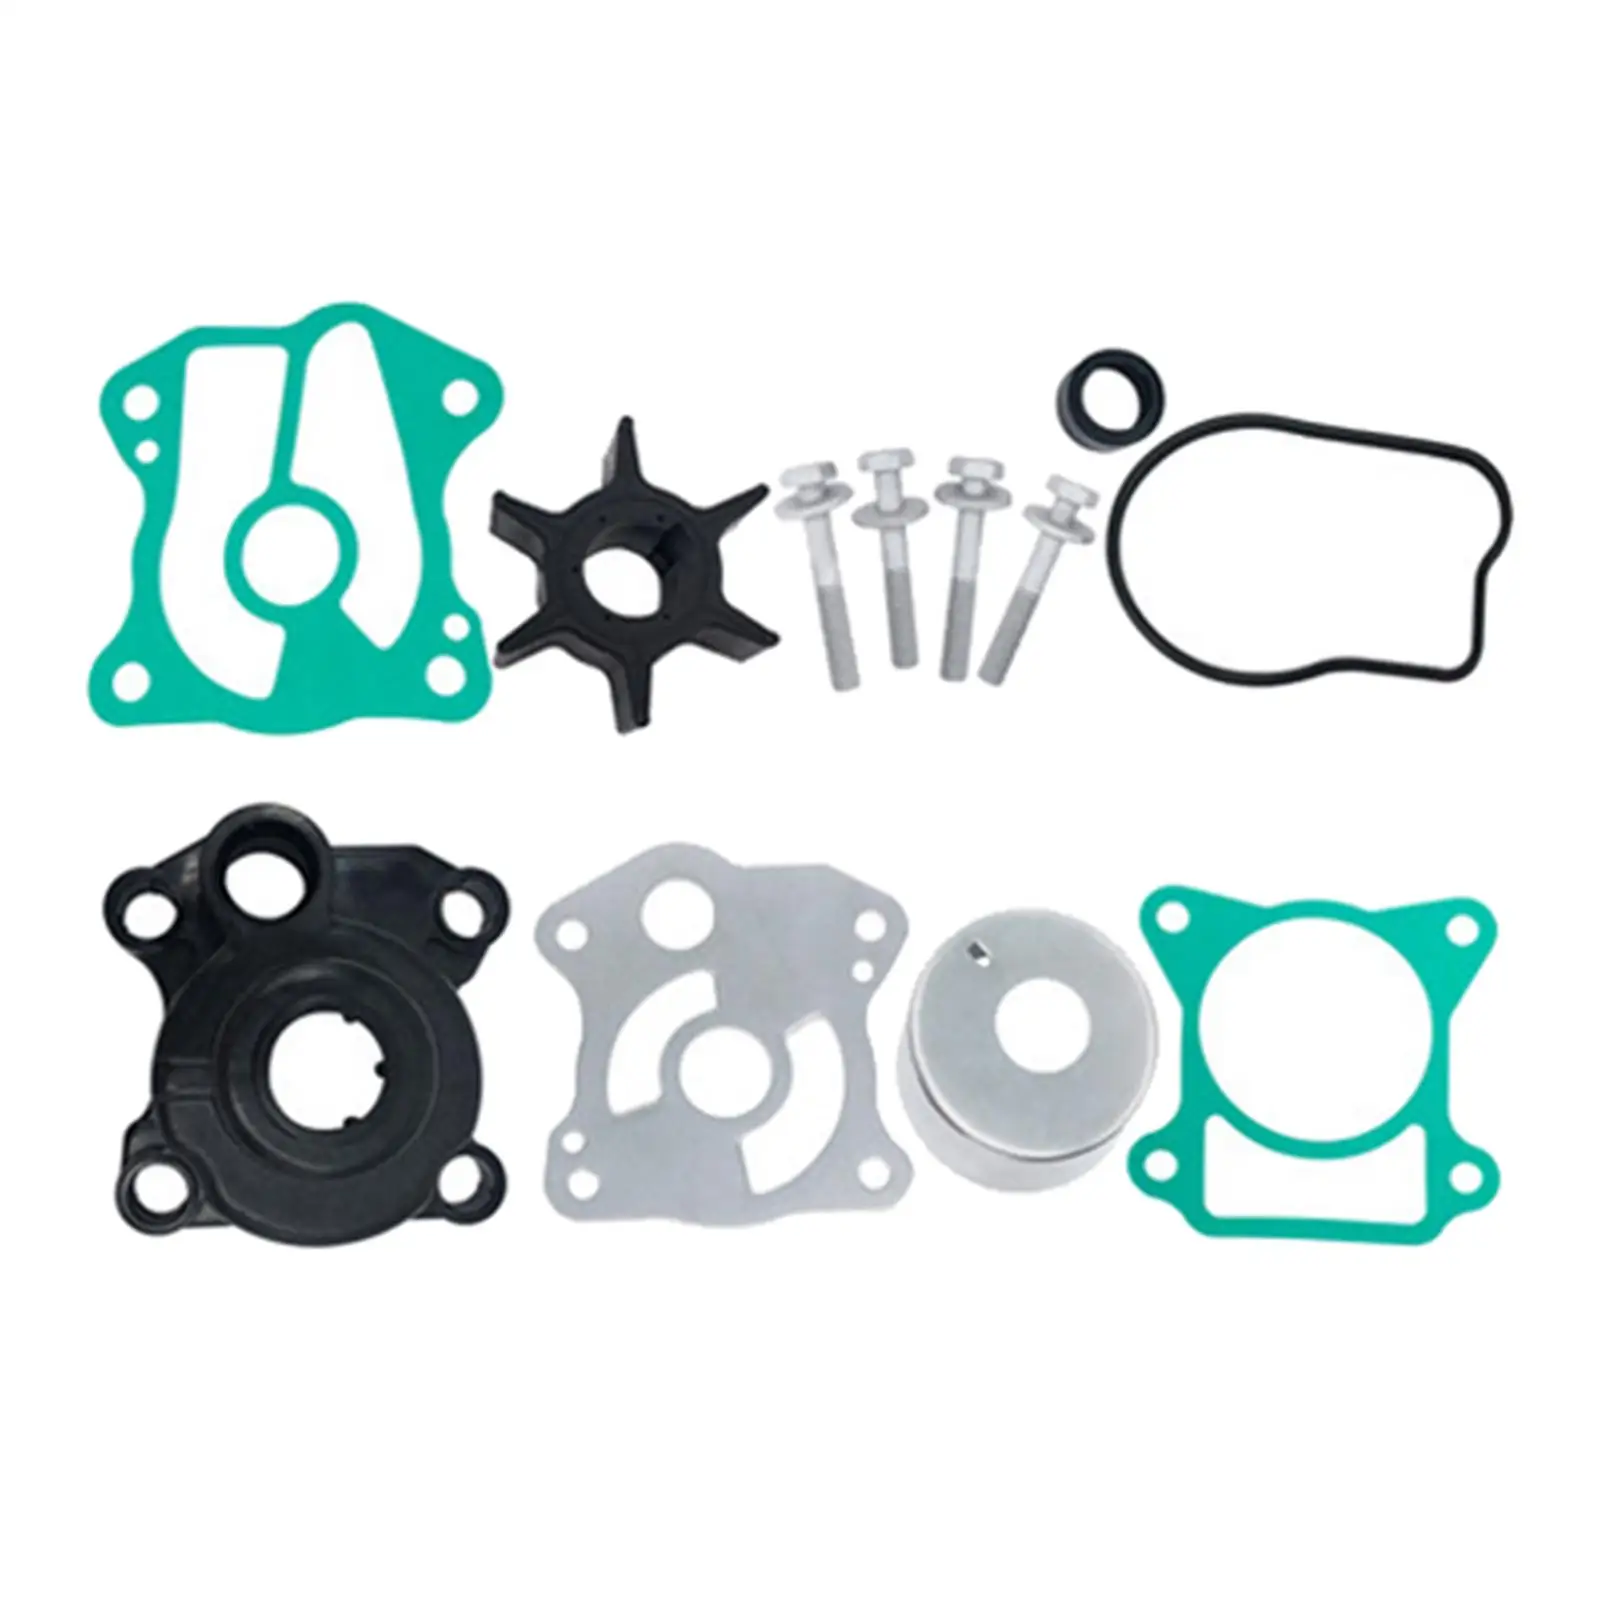 Water Pump Impeller Repair Kit for Honda BF25A BF25D BF30A BF30D 06193-ZV7-010 Outboard Engines